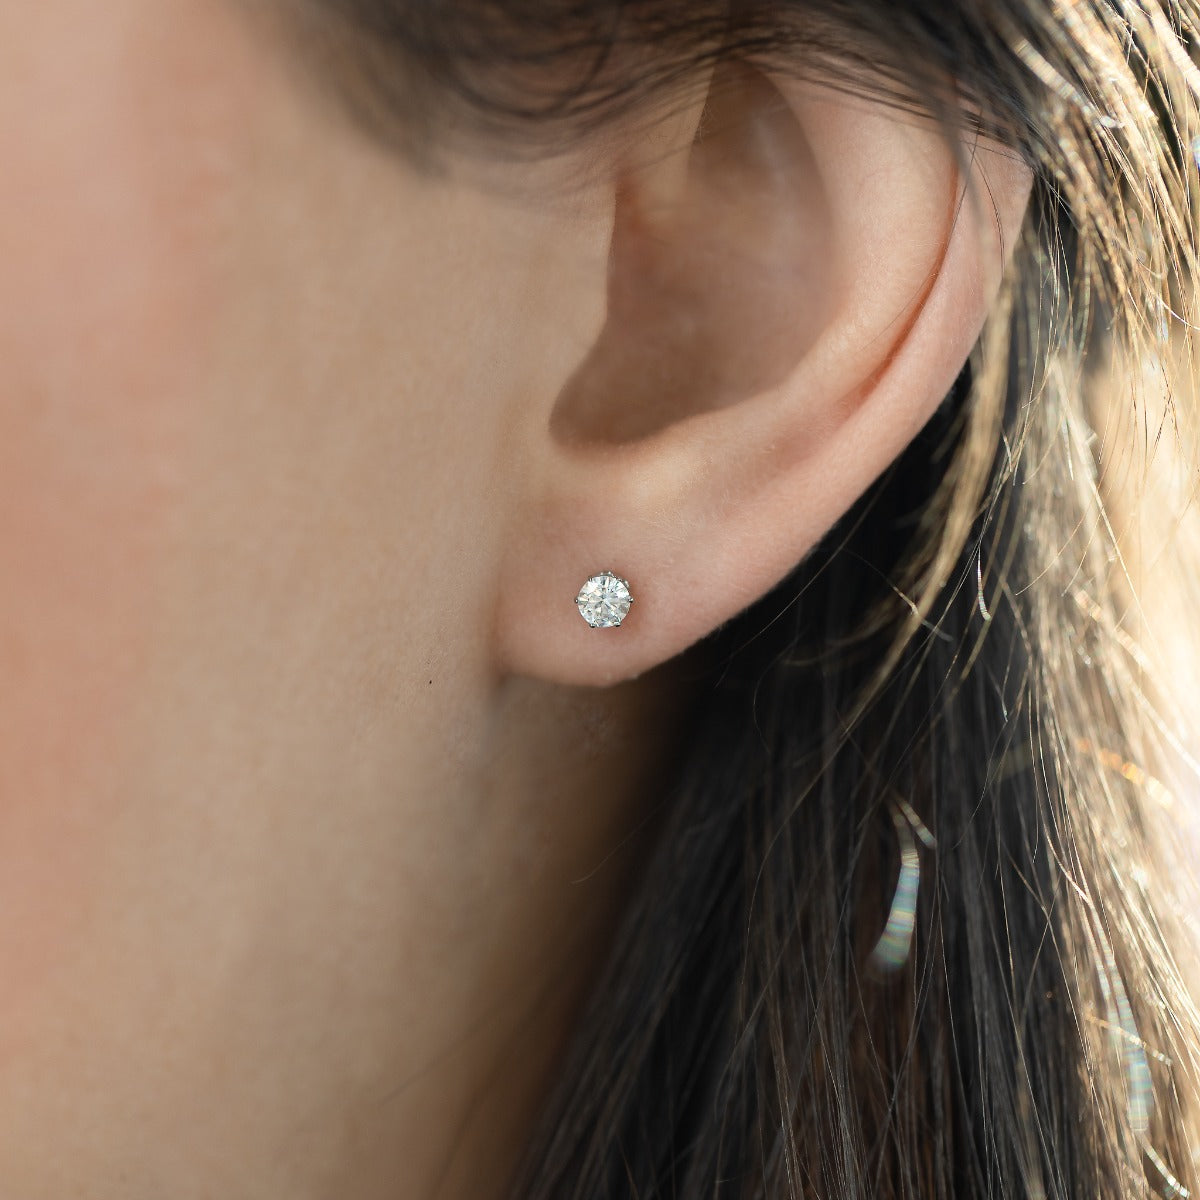 Small mini 3mm silvered stainless steel earrings with a white circle zirconia stone